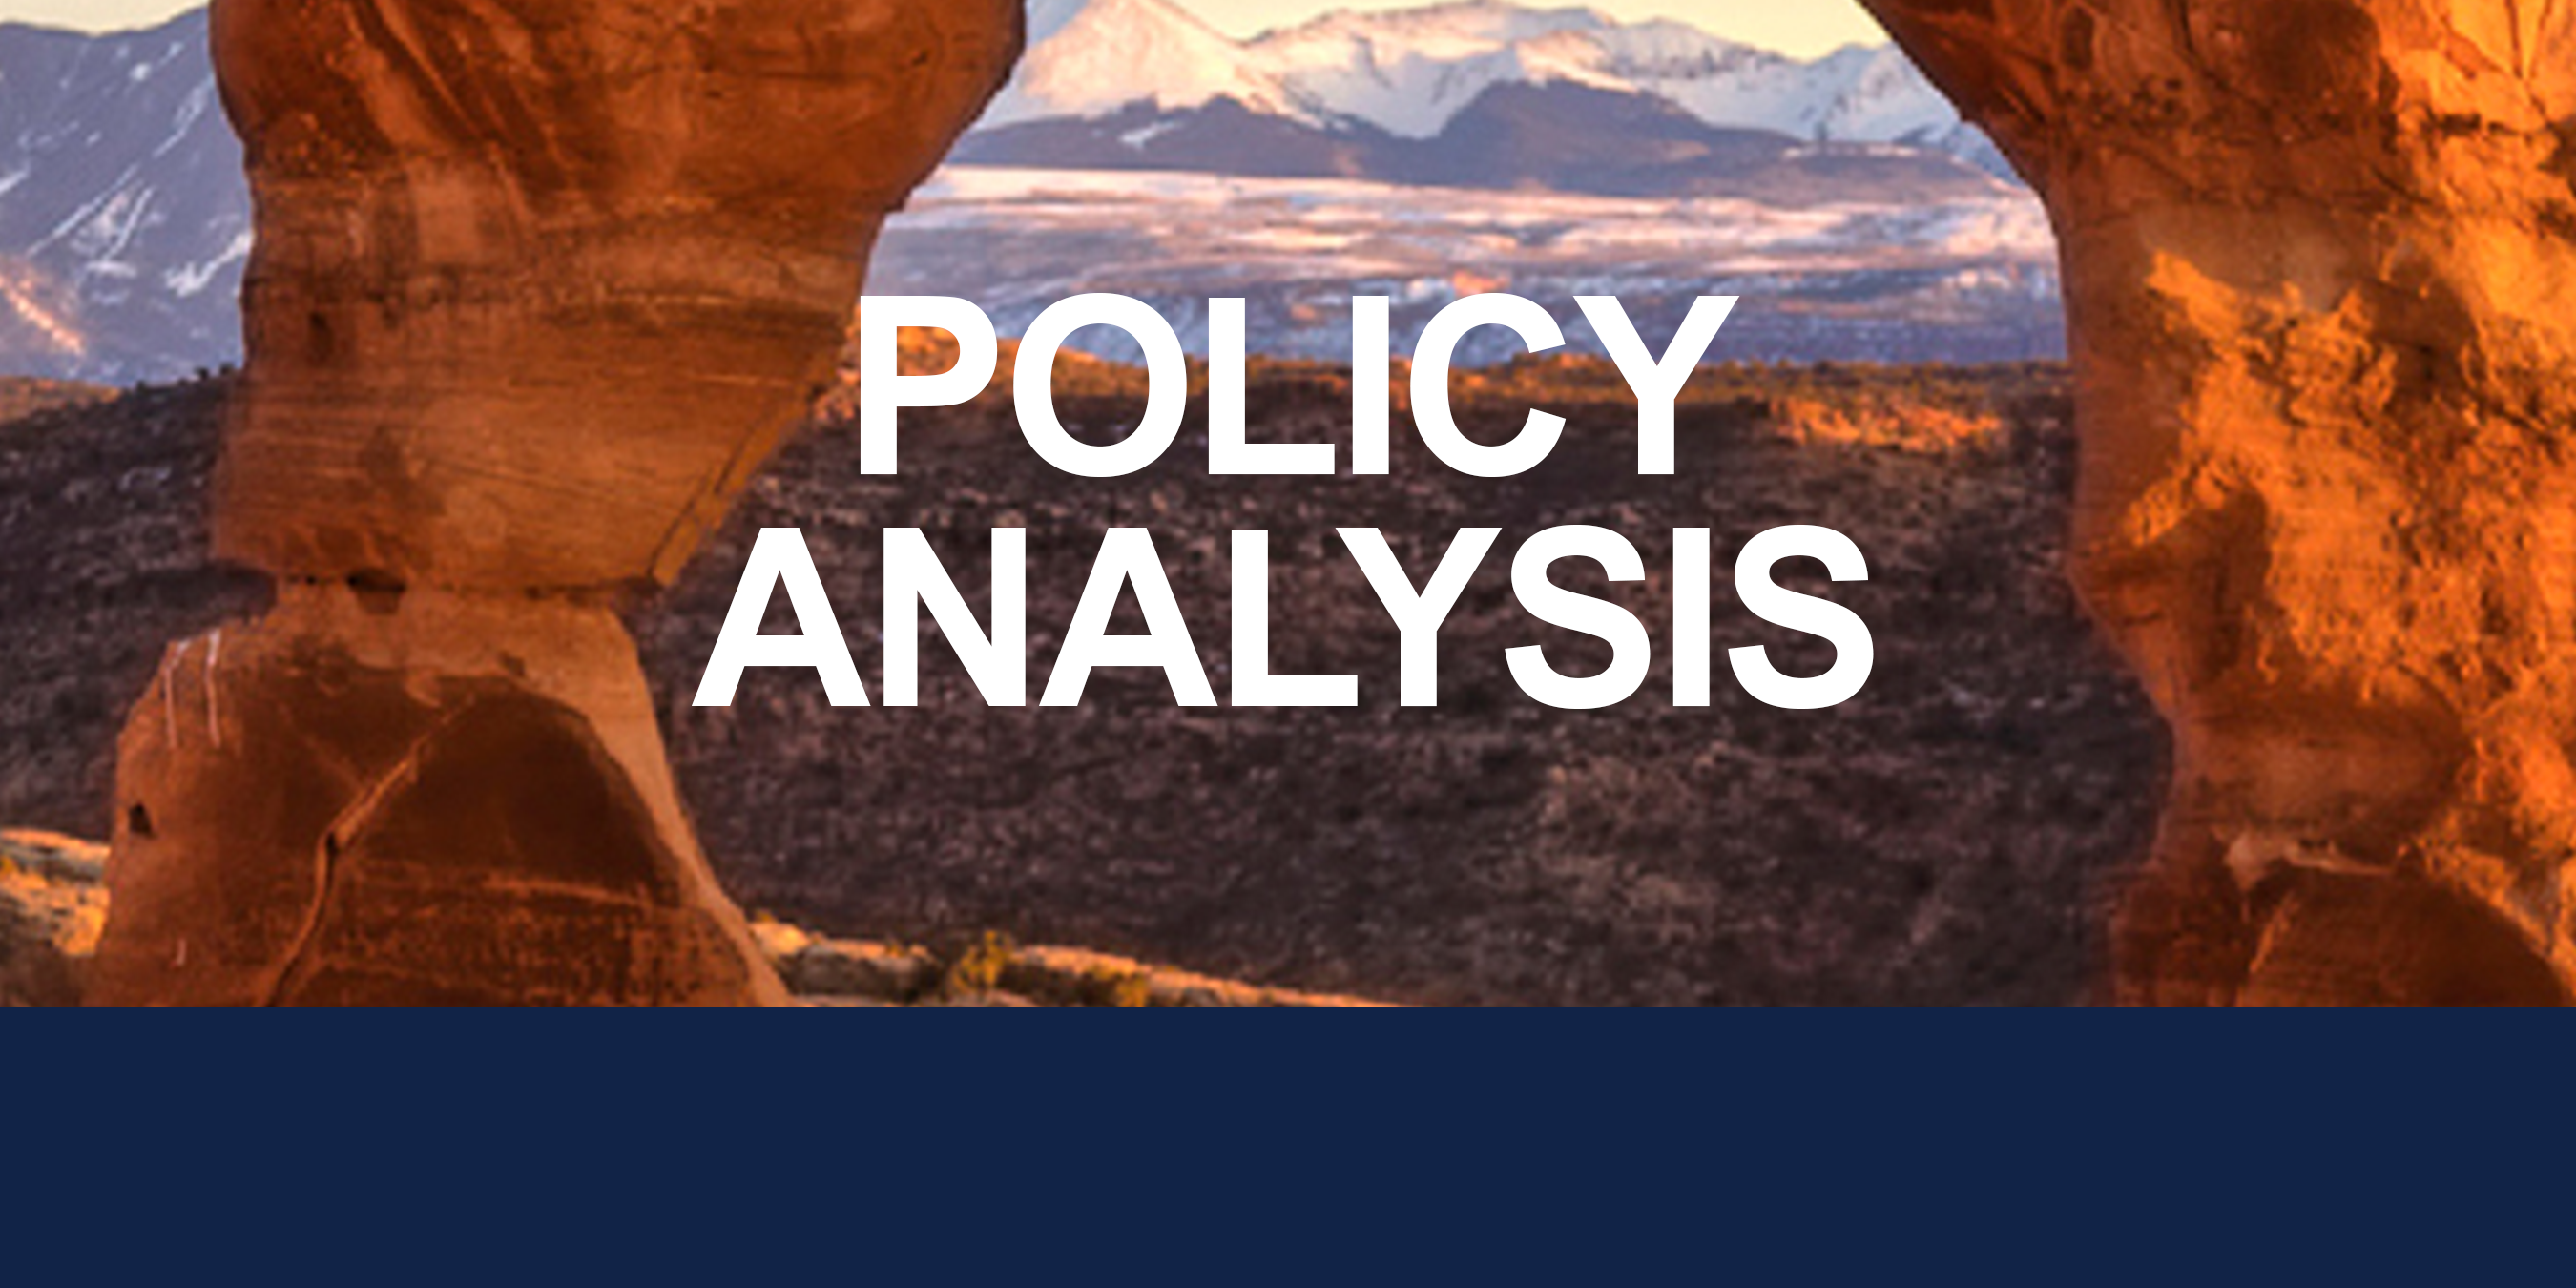 POLICY ANALYSIS